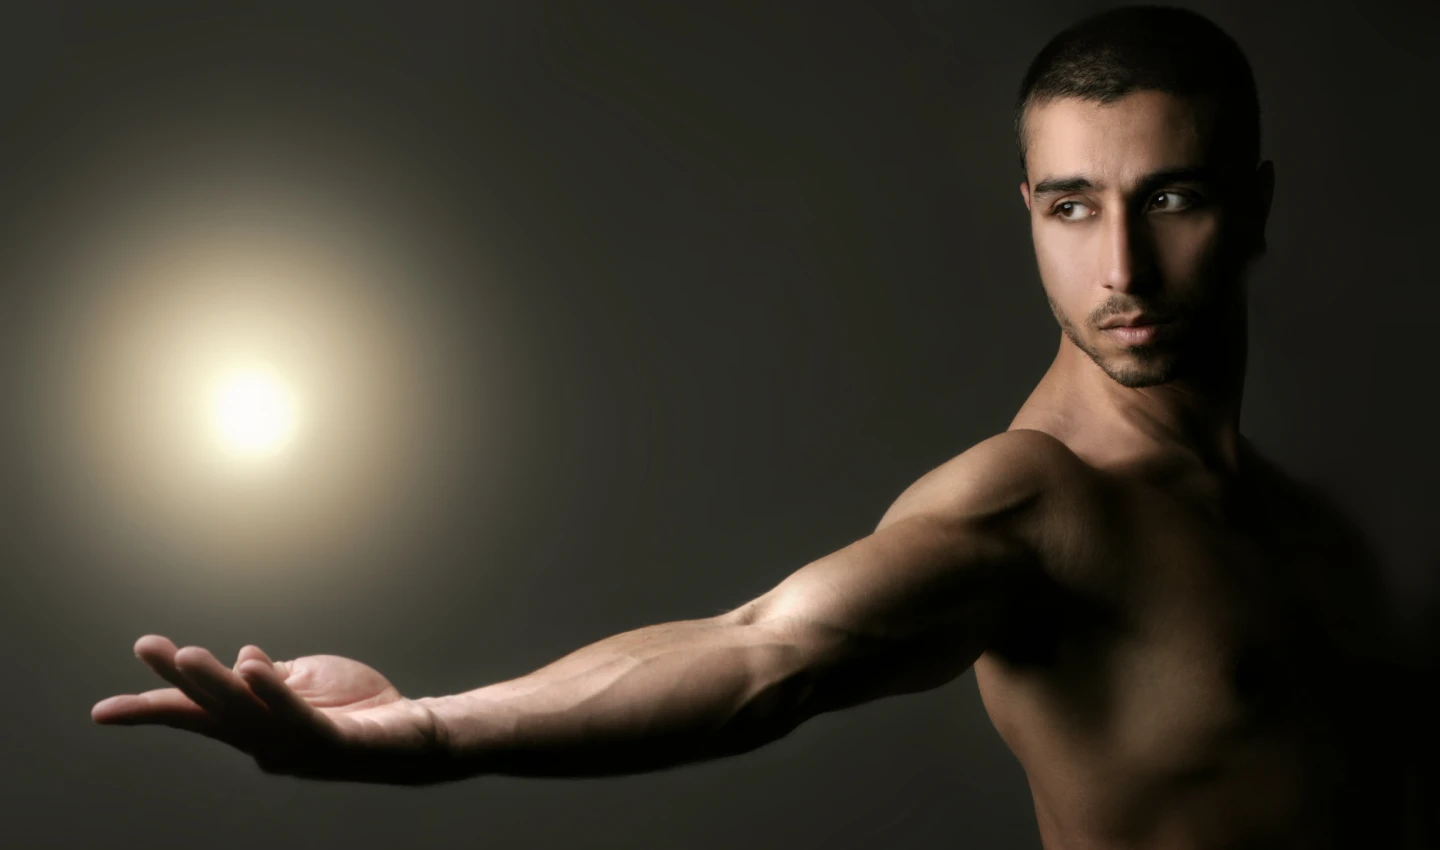 Visualization in Men's Body Care - An image of a muscular arm against a black background with a shiny spot in the background. The well-groomed arm suggests the importance of visualizing your body care routine for achieving desired results.